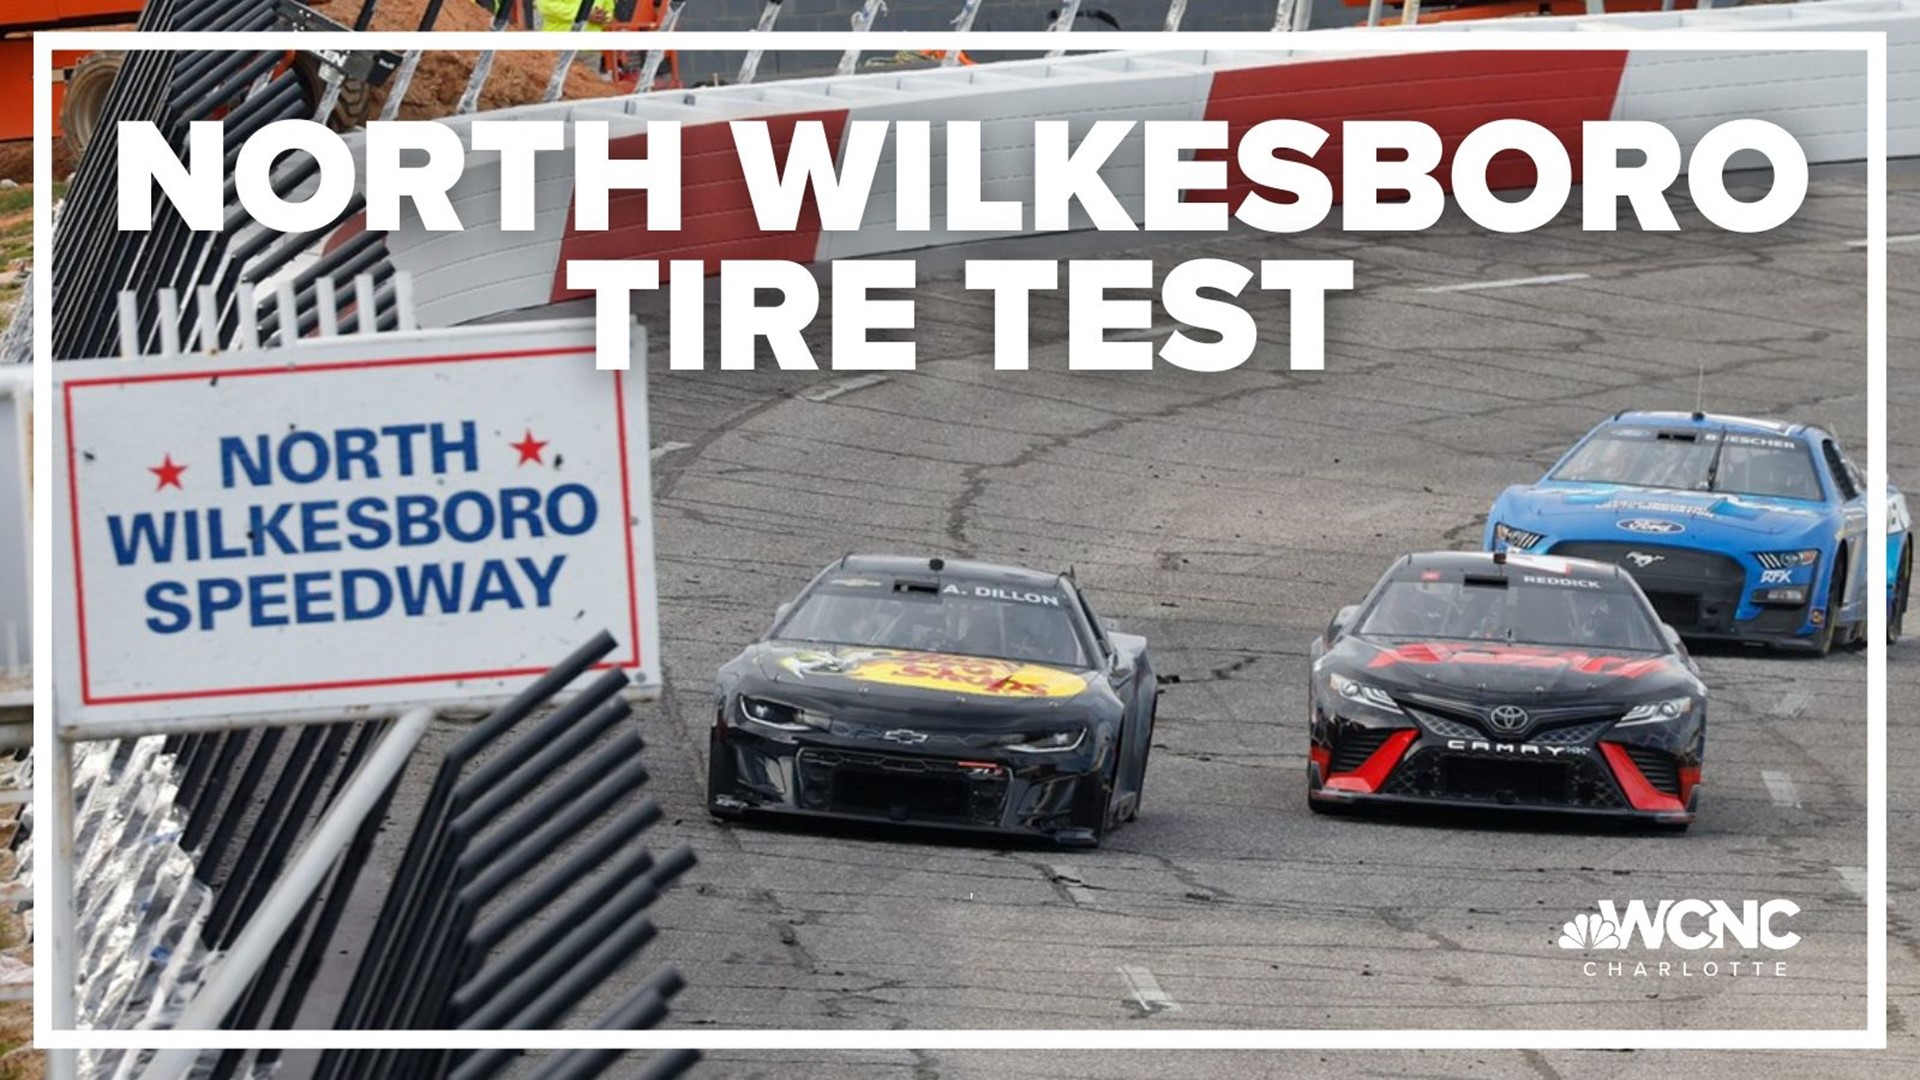 Austin Dillon, Chris Buescher and Tyler Reddick took part in a Goodyear tire test at North Wilkesboro, turning laps around the historic speedway.